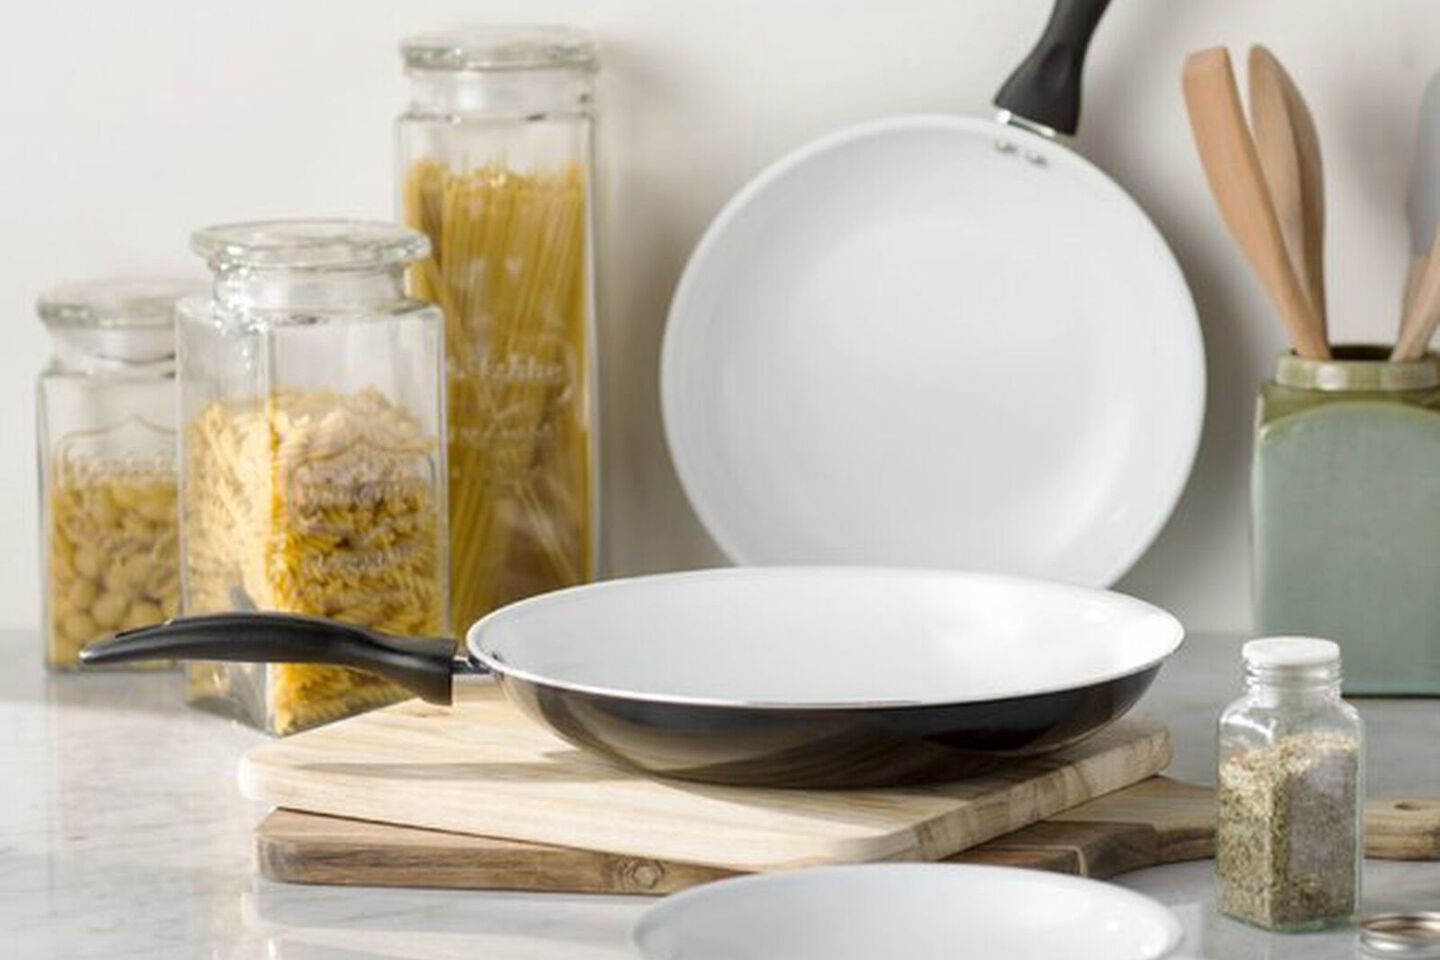 Two black and white pans sitting on top of a cutting board next to glass storage containers